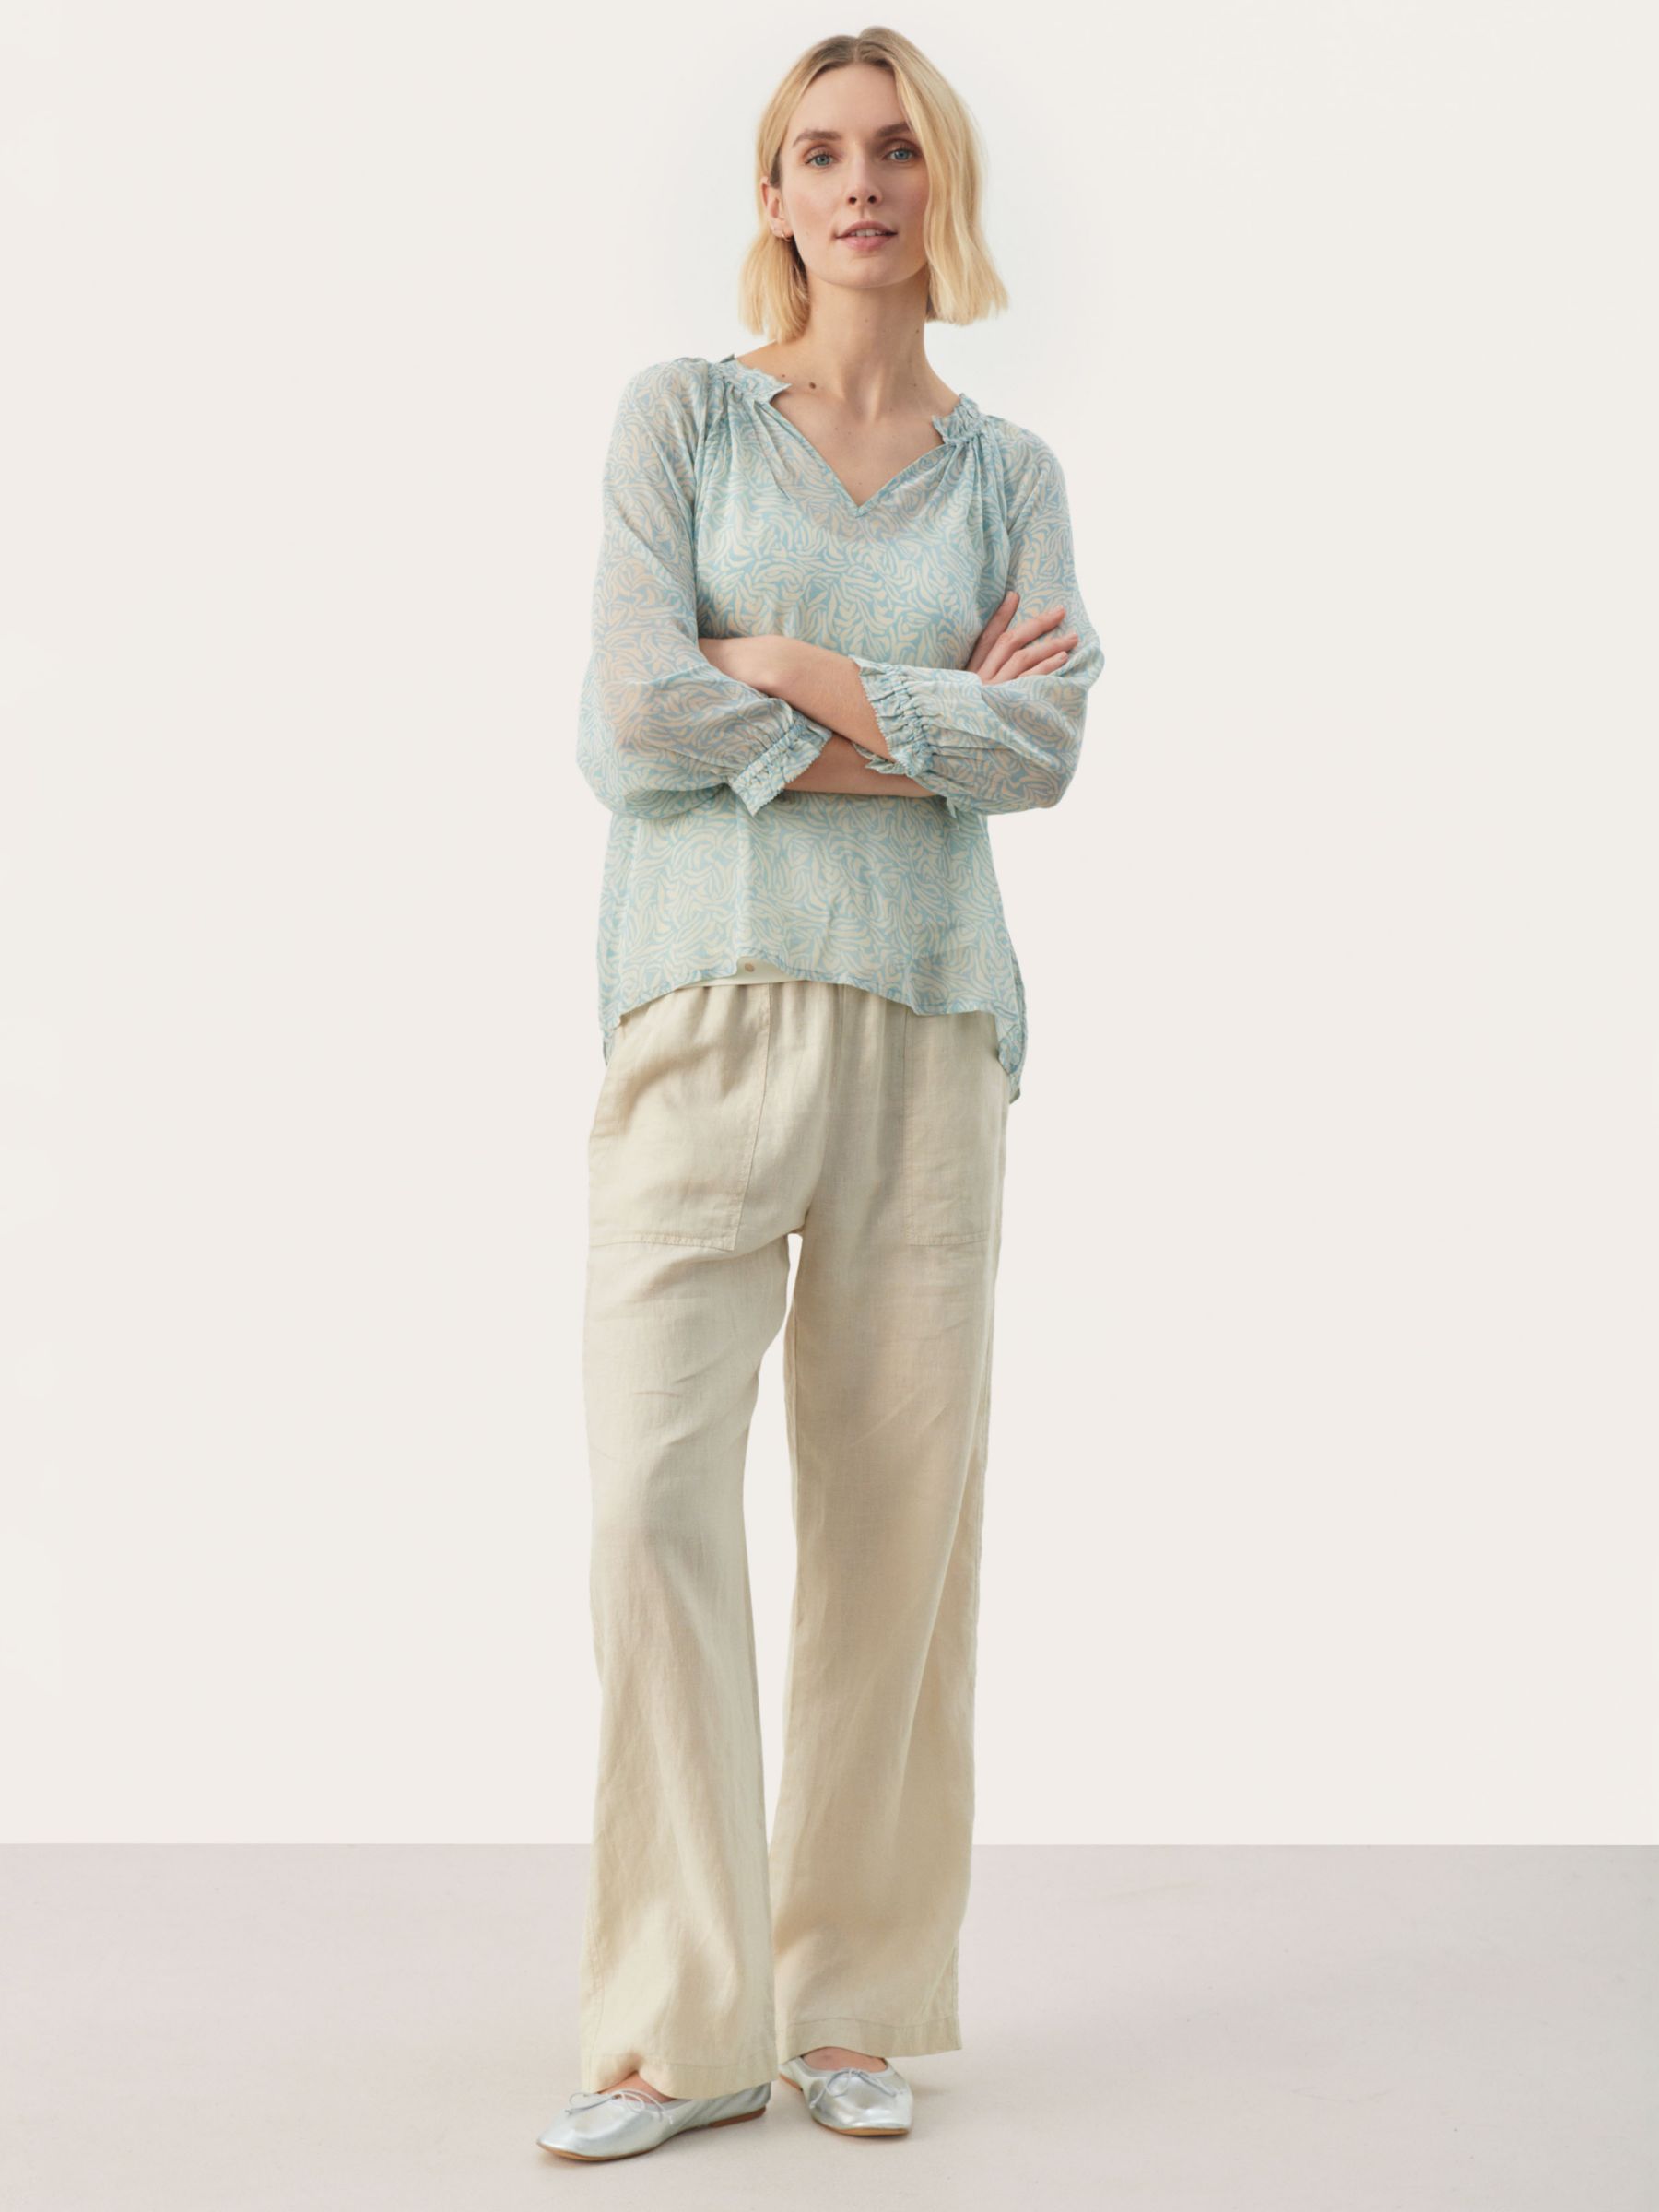 Buy Part Two Elsia Casual Fit 3/4 Sleeve Blouse Online at johnlewis.com